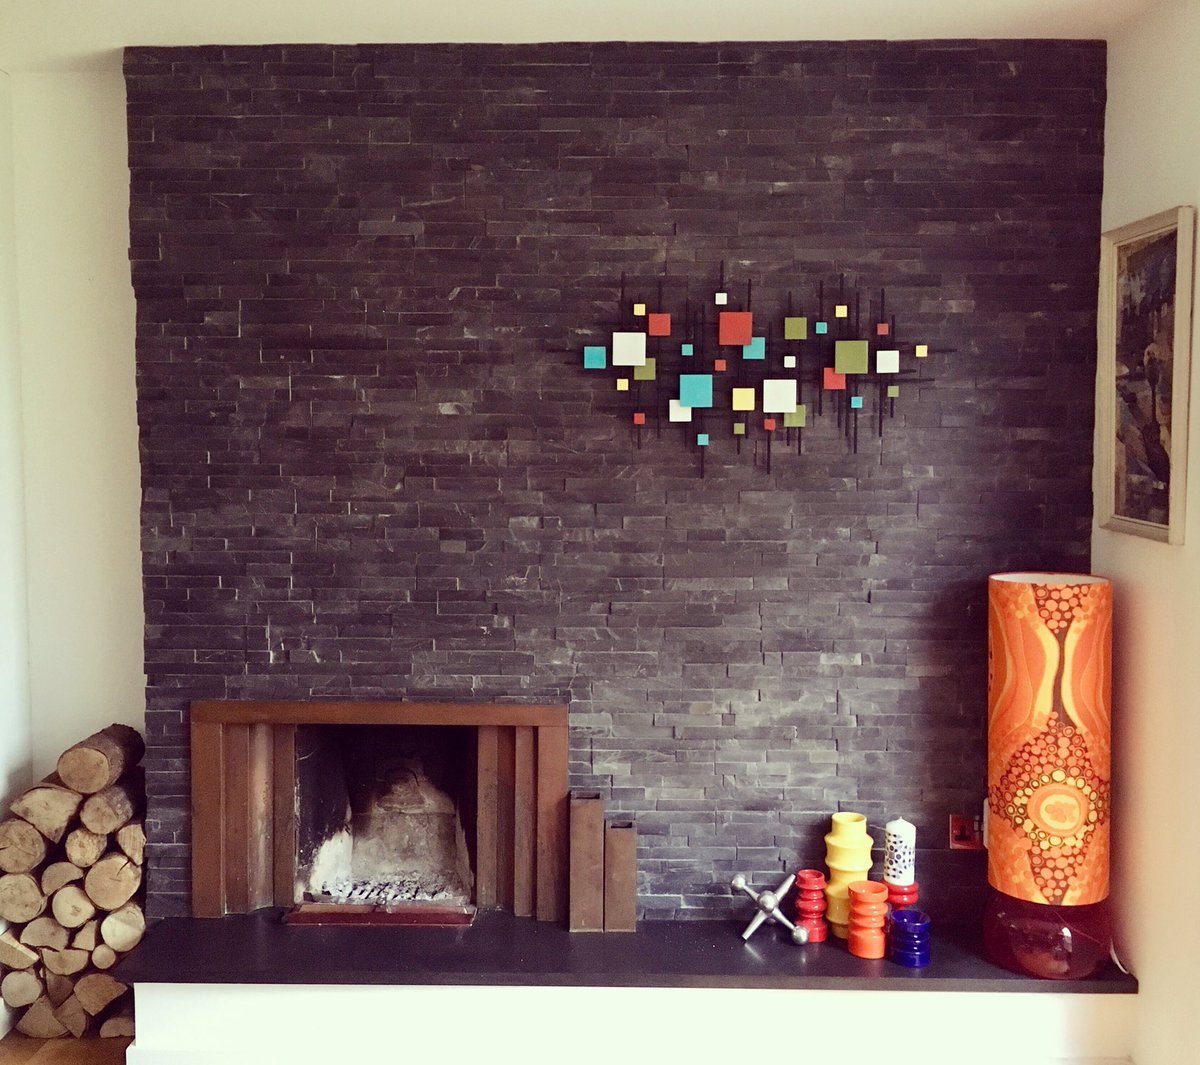 New metal-wall-sculpture-thing completes the 70s fireplace. #retrointeriors #70sdesign #fireplaces